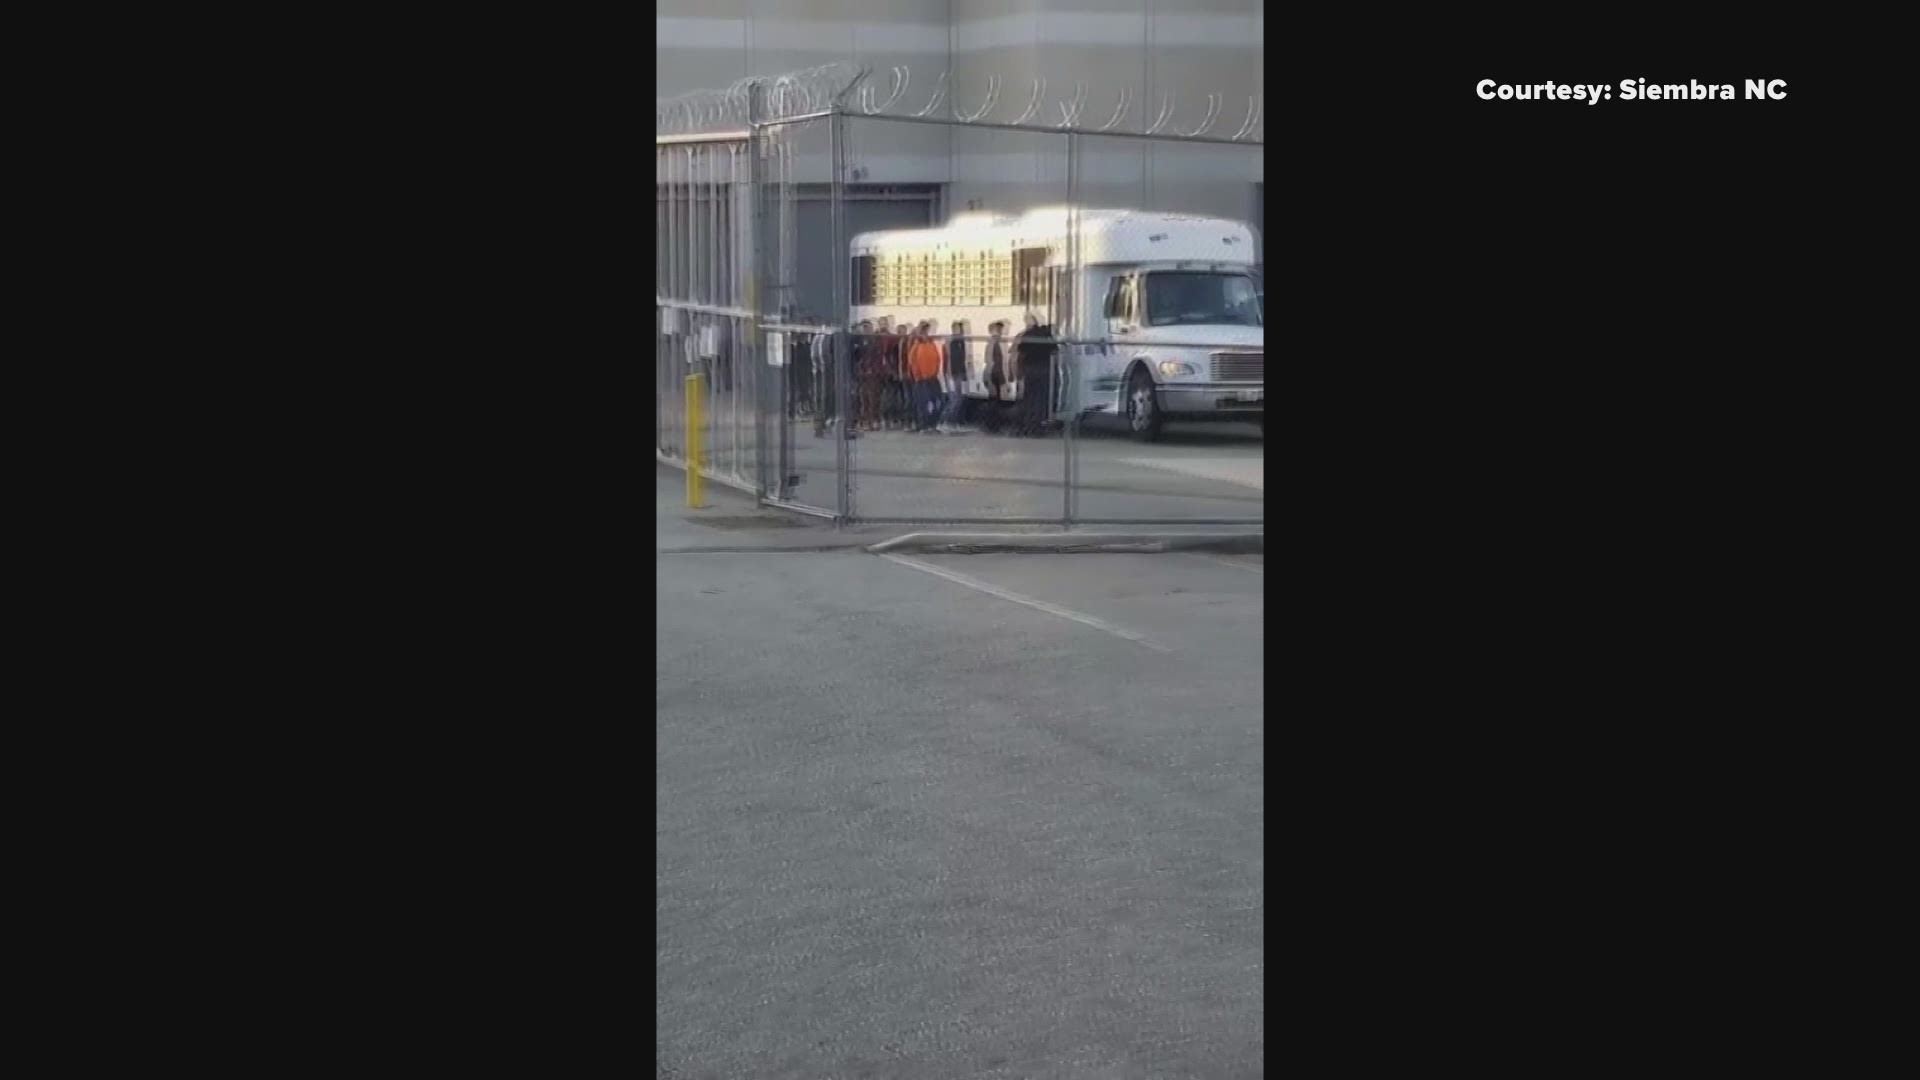 Siembra NC, an immigrant rights group, posted this video in part that appears to show undocumented immigrants being loaded onto a bus outside the Alamance County jail. According to the group, the bus is taking the ICE detainees to Georgia.